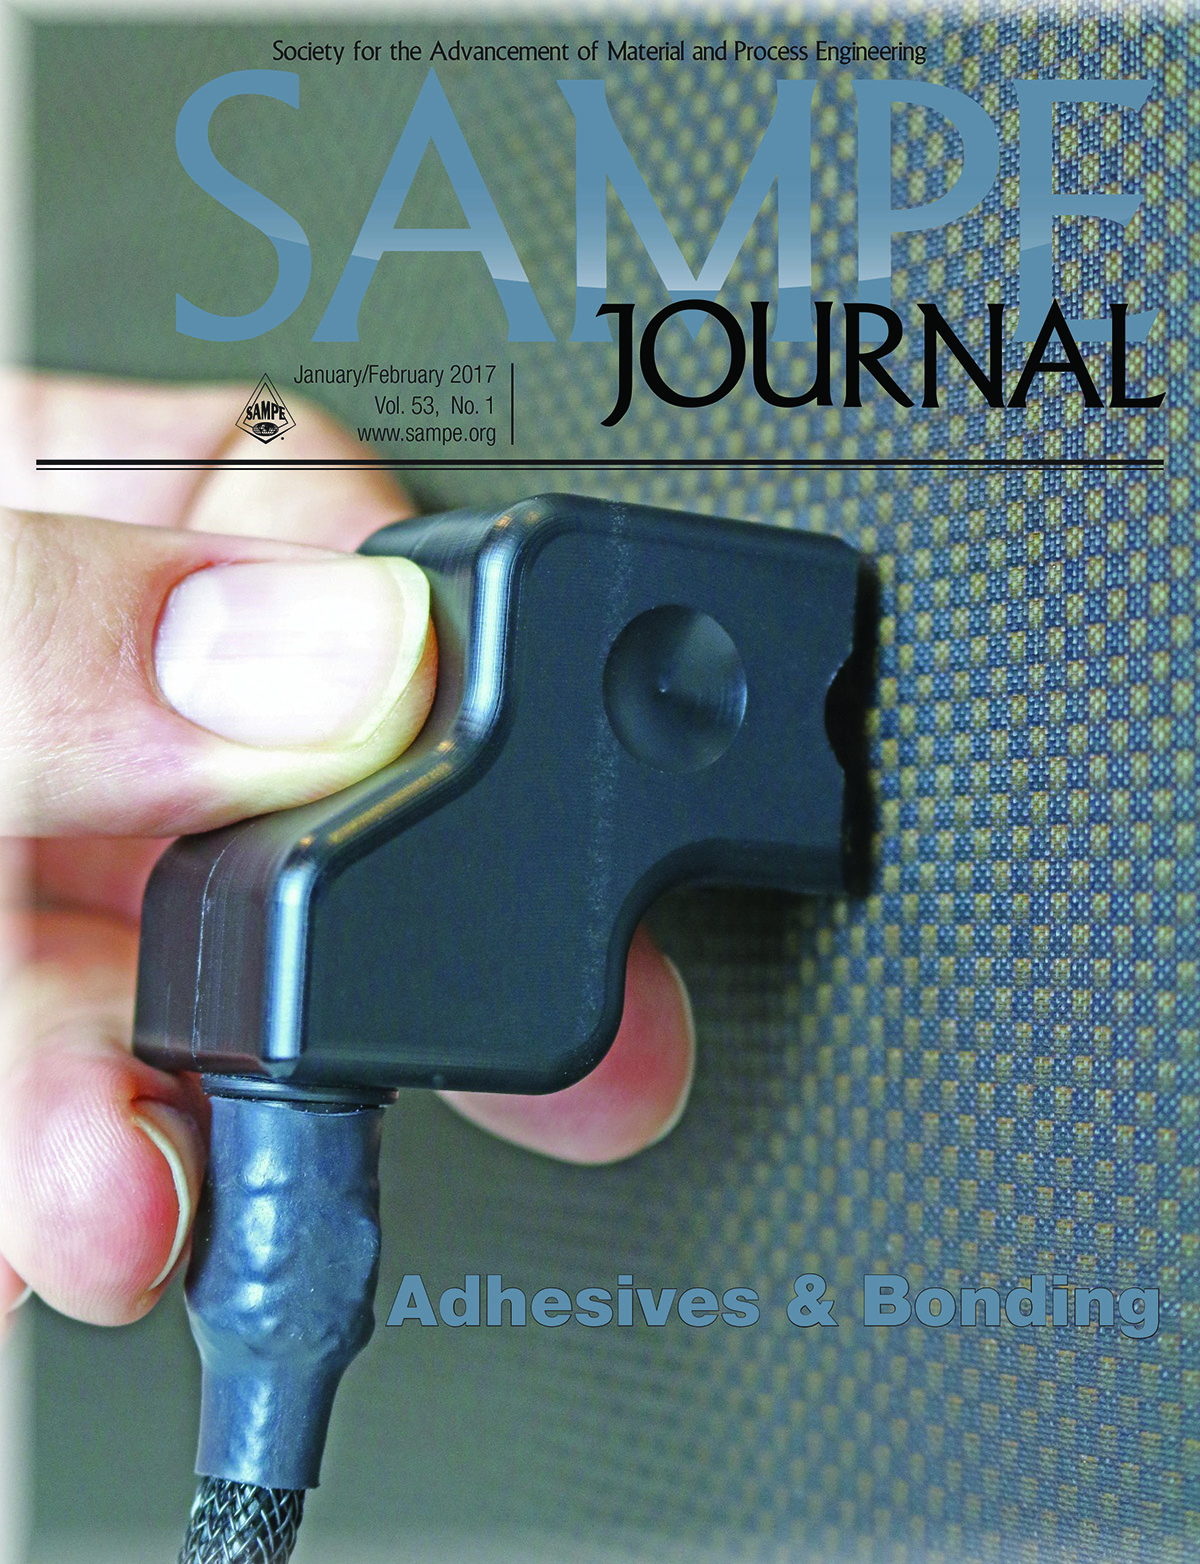 The Surface Analyst Featured in SAMPE Journal